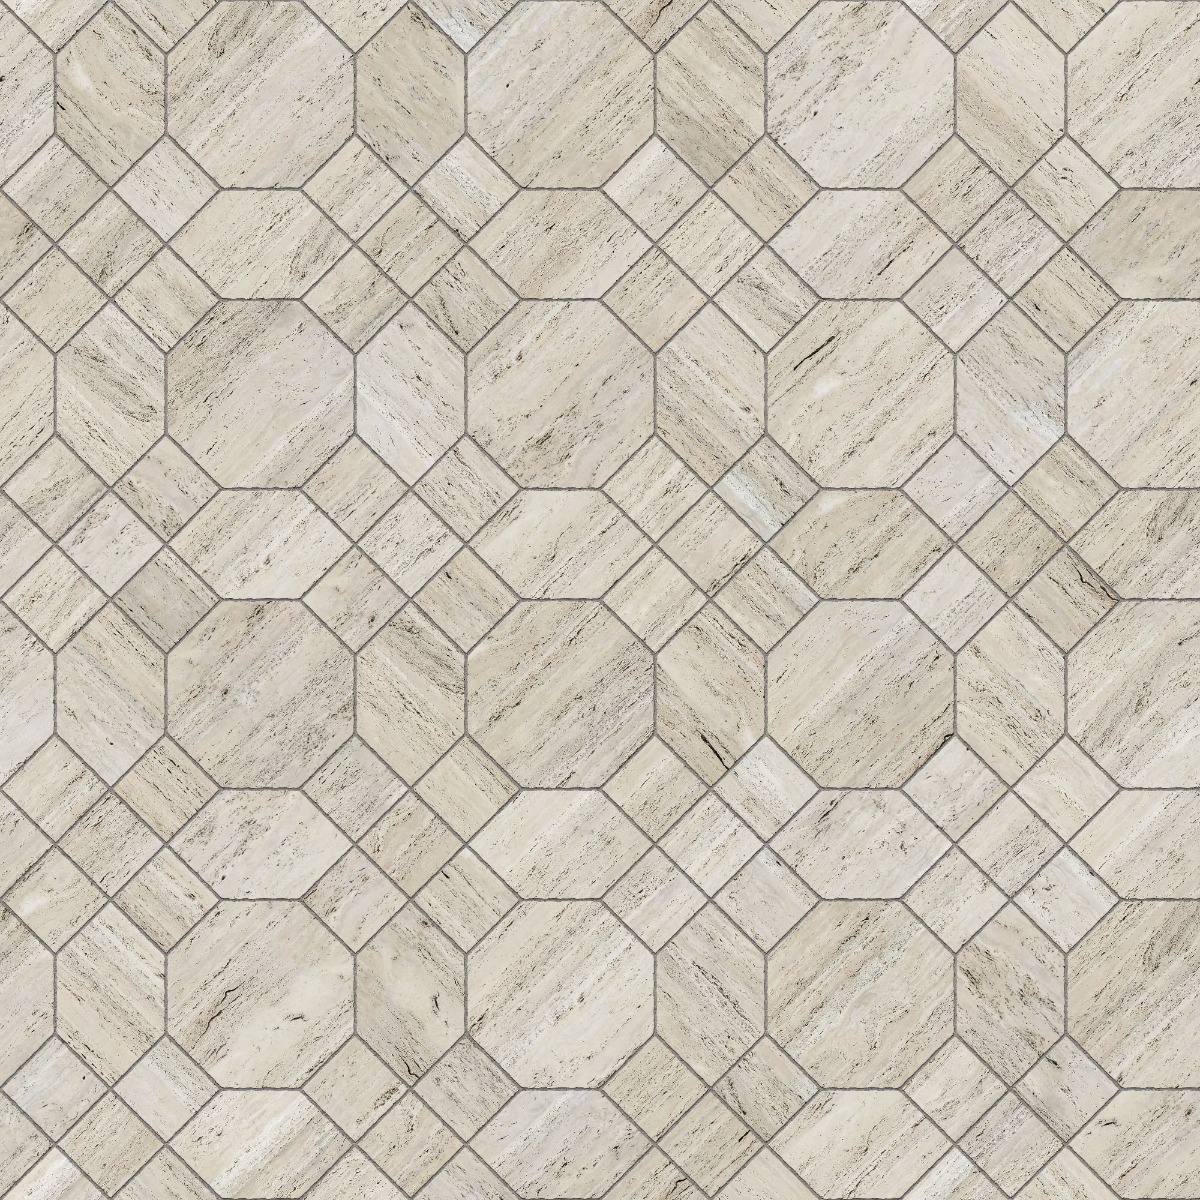 A seamless stone texture with travertine blocks arranged in a Octagon Picket pattern